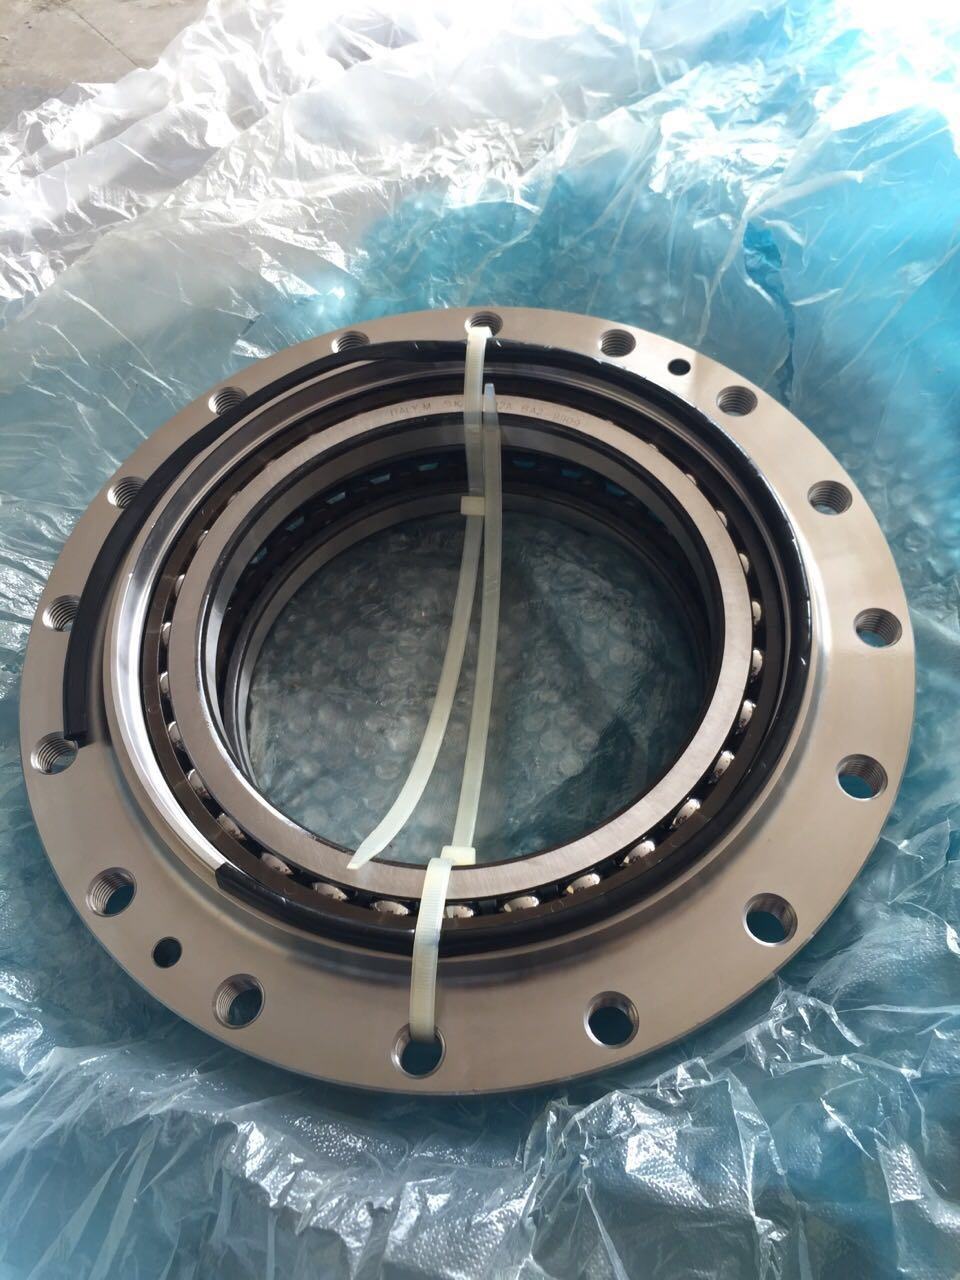 Rexroth Gearbox GFT60W3B86-21  for Rotary Drilling Rig Main Winch Reducer Sany XCMG Zoomlion Sunward